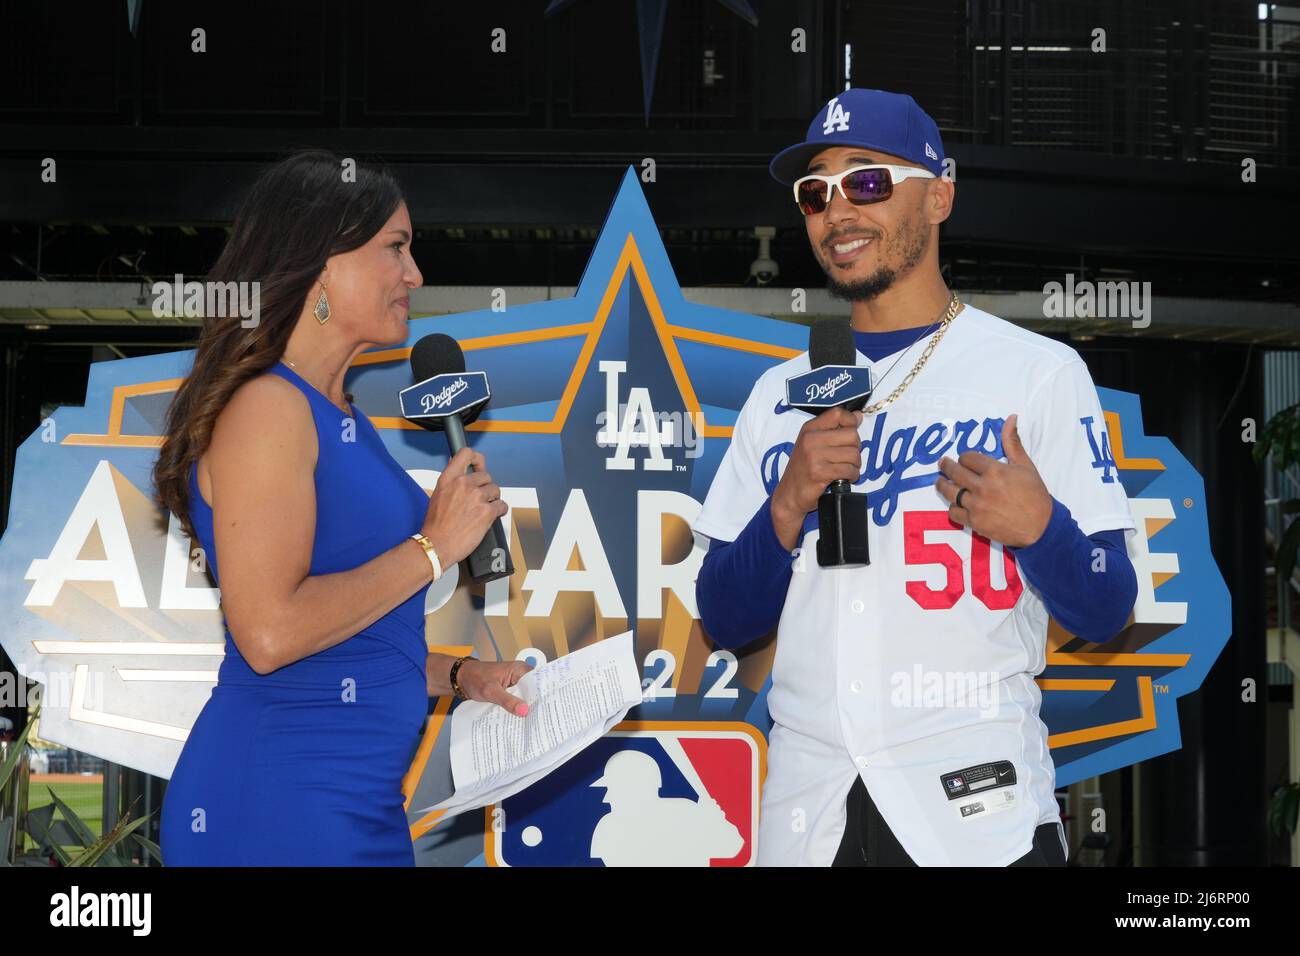 Dodgers 2022 All-Star Week press conference